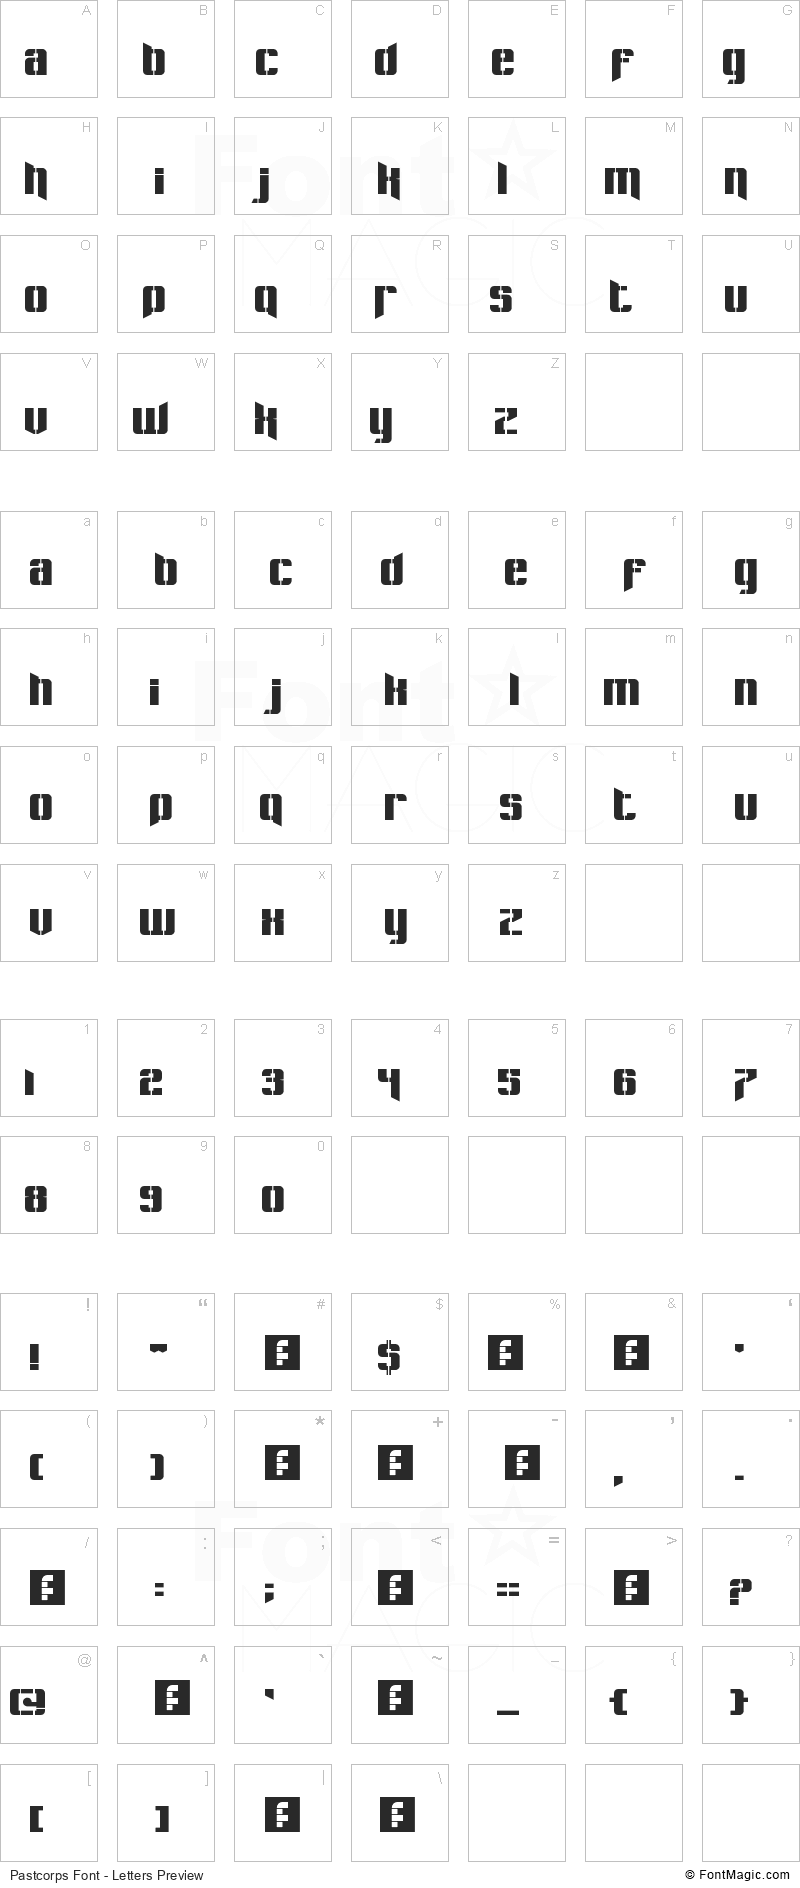 Pastcorps Font - All Latters Preview Chart